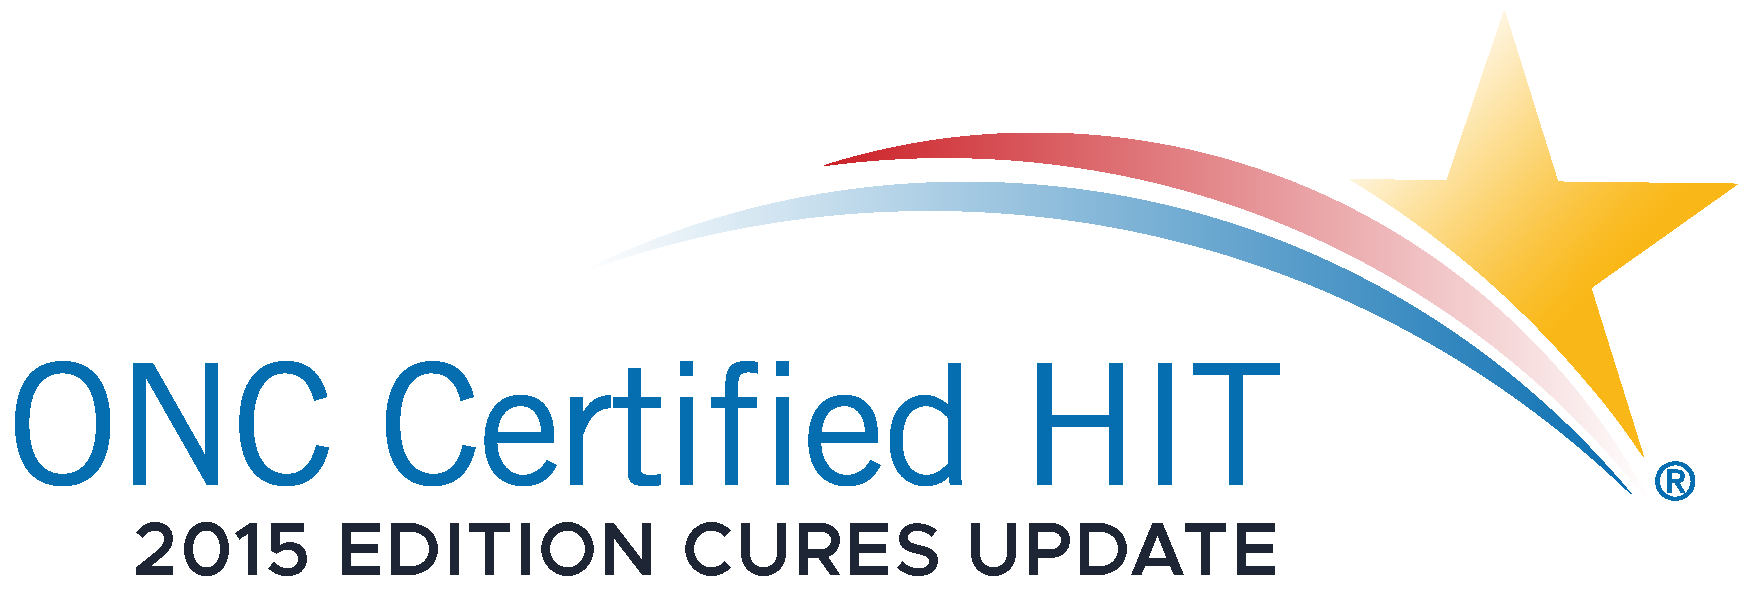 ONC Certified Cures Update HIT mark